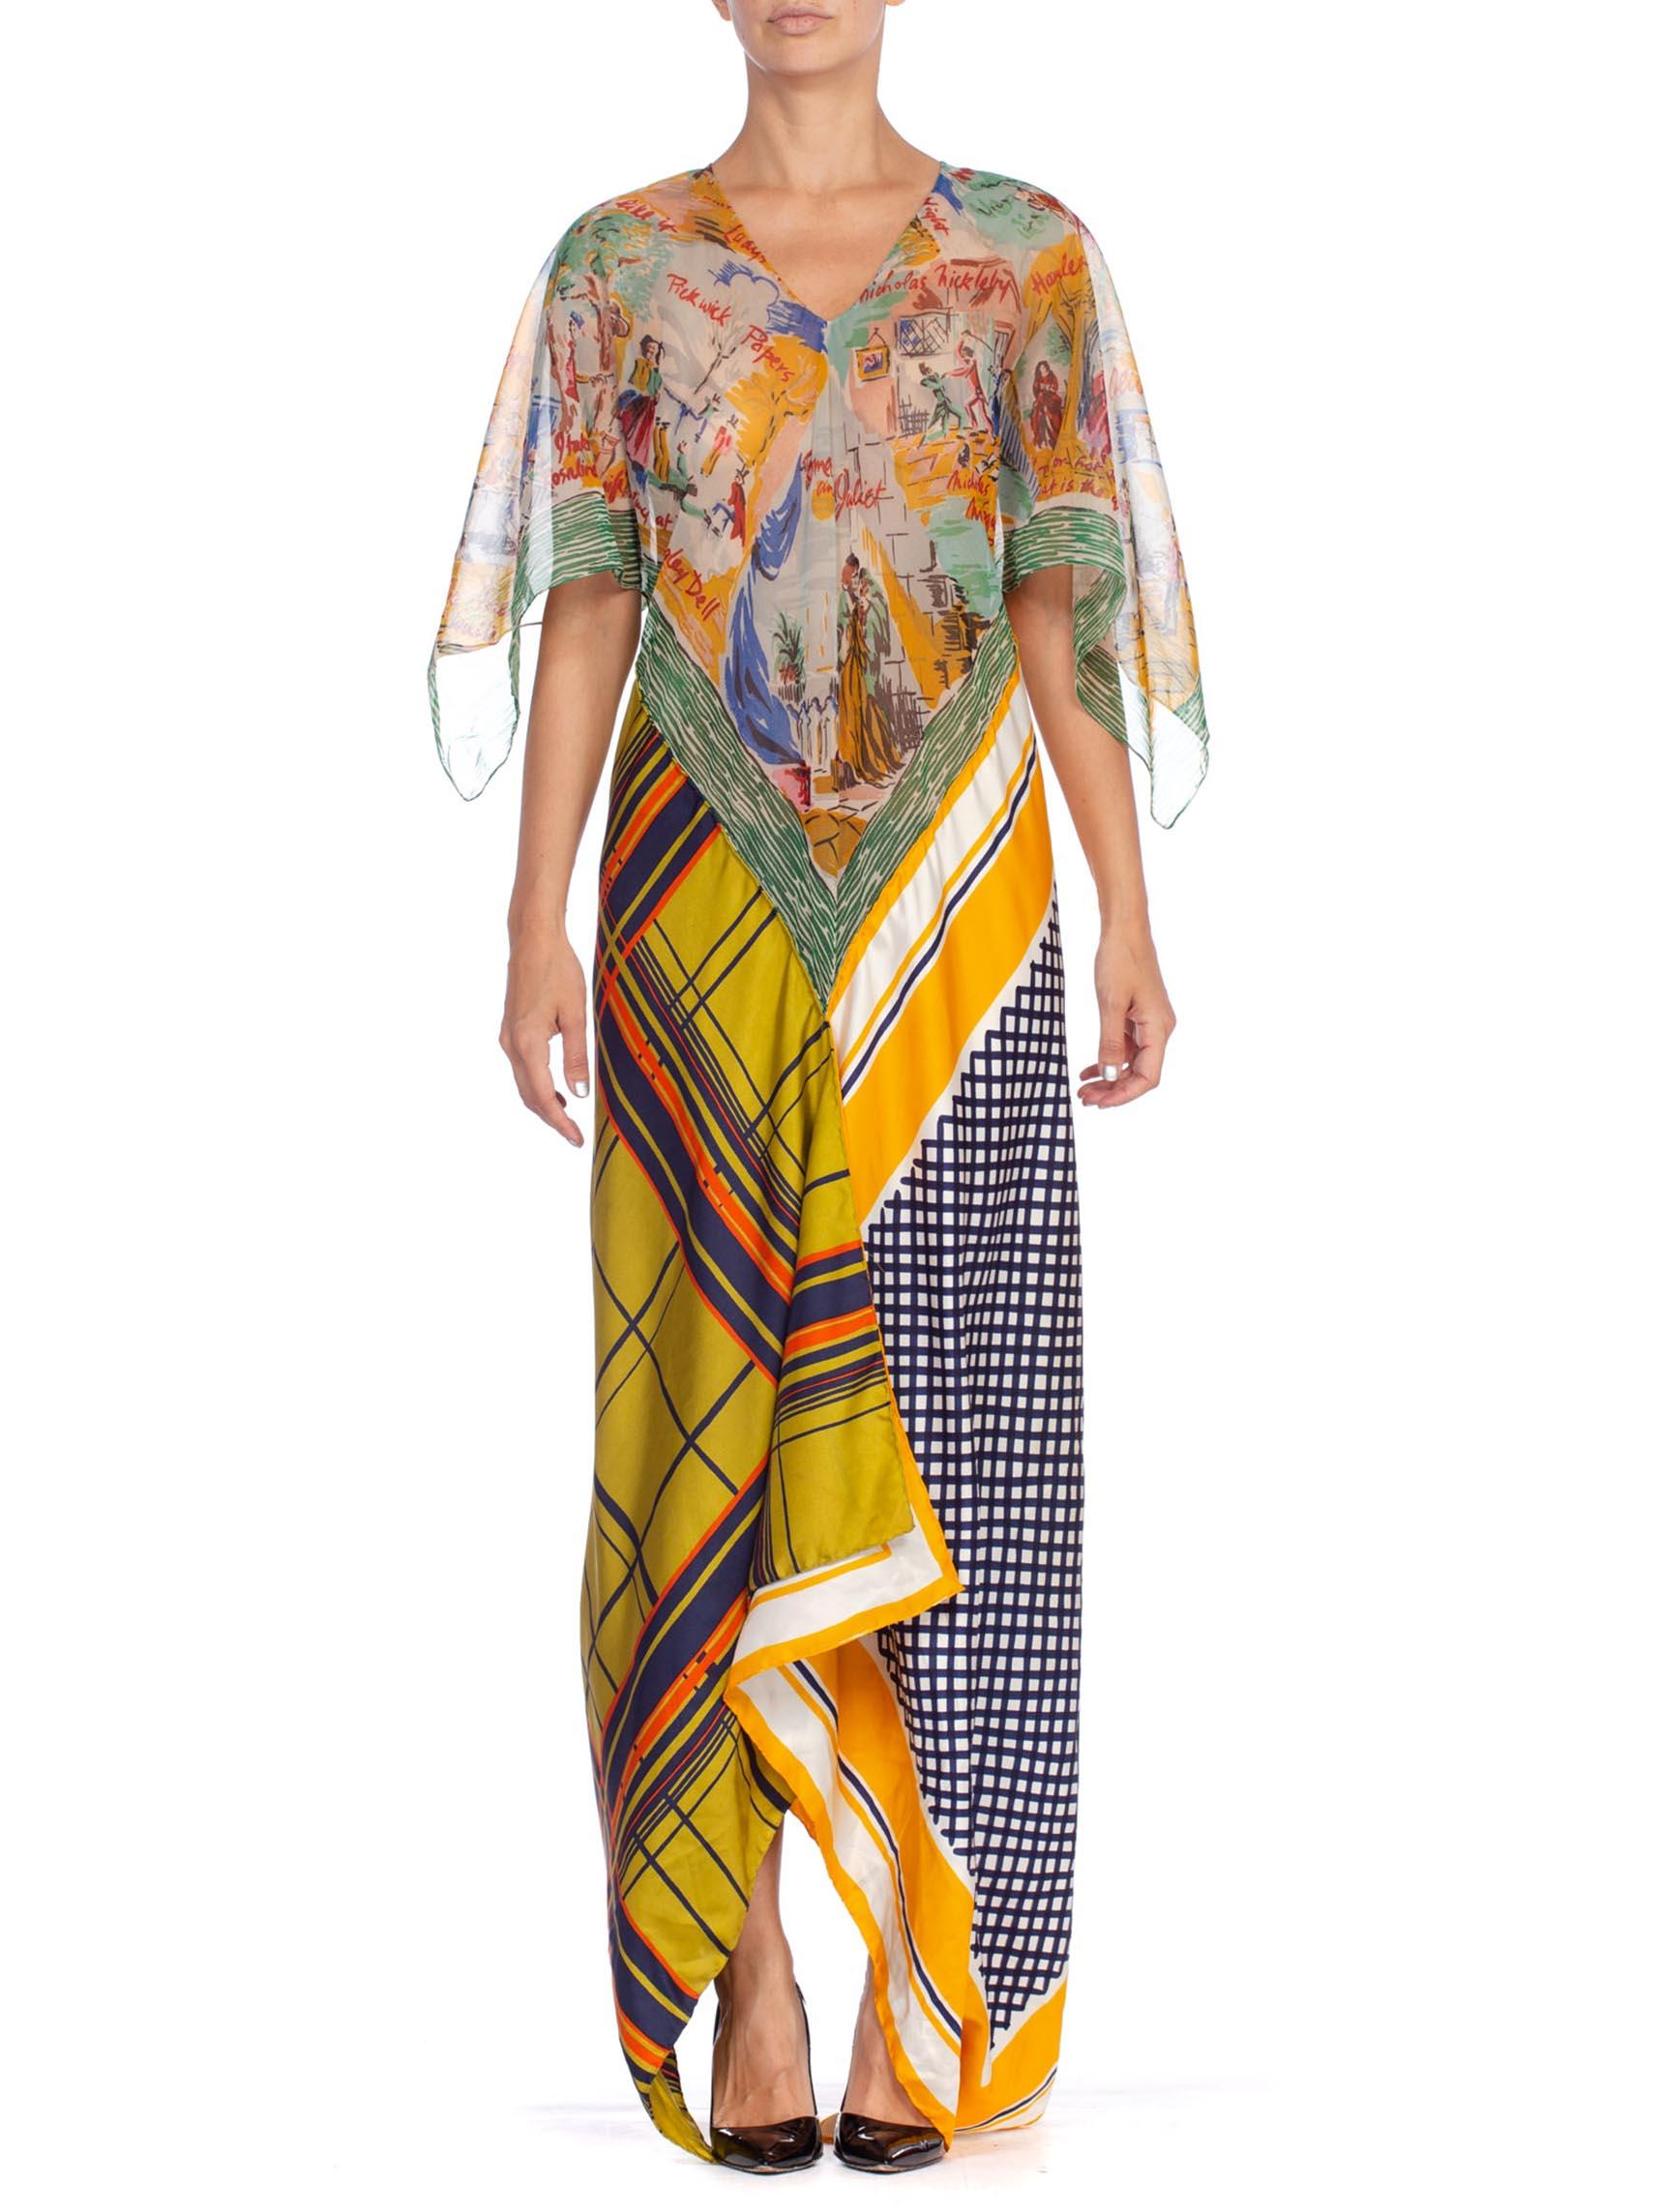 MORPHEW COLLECTION Yellow & Blue Scenic Geo Print Bias Cut Kaftan Dress Made From 1960’S Scarves
MORPHEW COLLECTION is made entirely by hand in our NYC Ateliér of rare antique materials sourced from around the globe. Our sustainable vintage